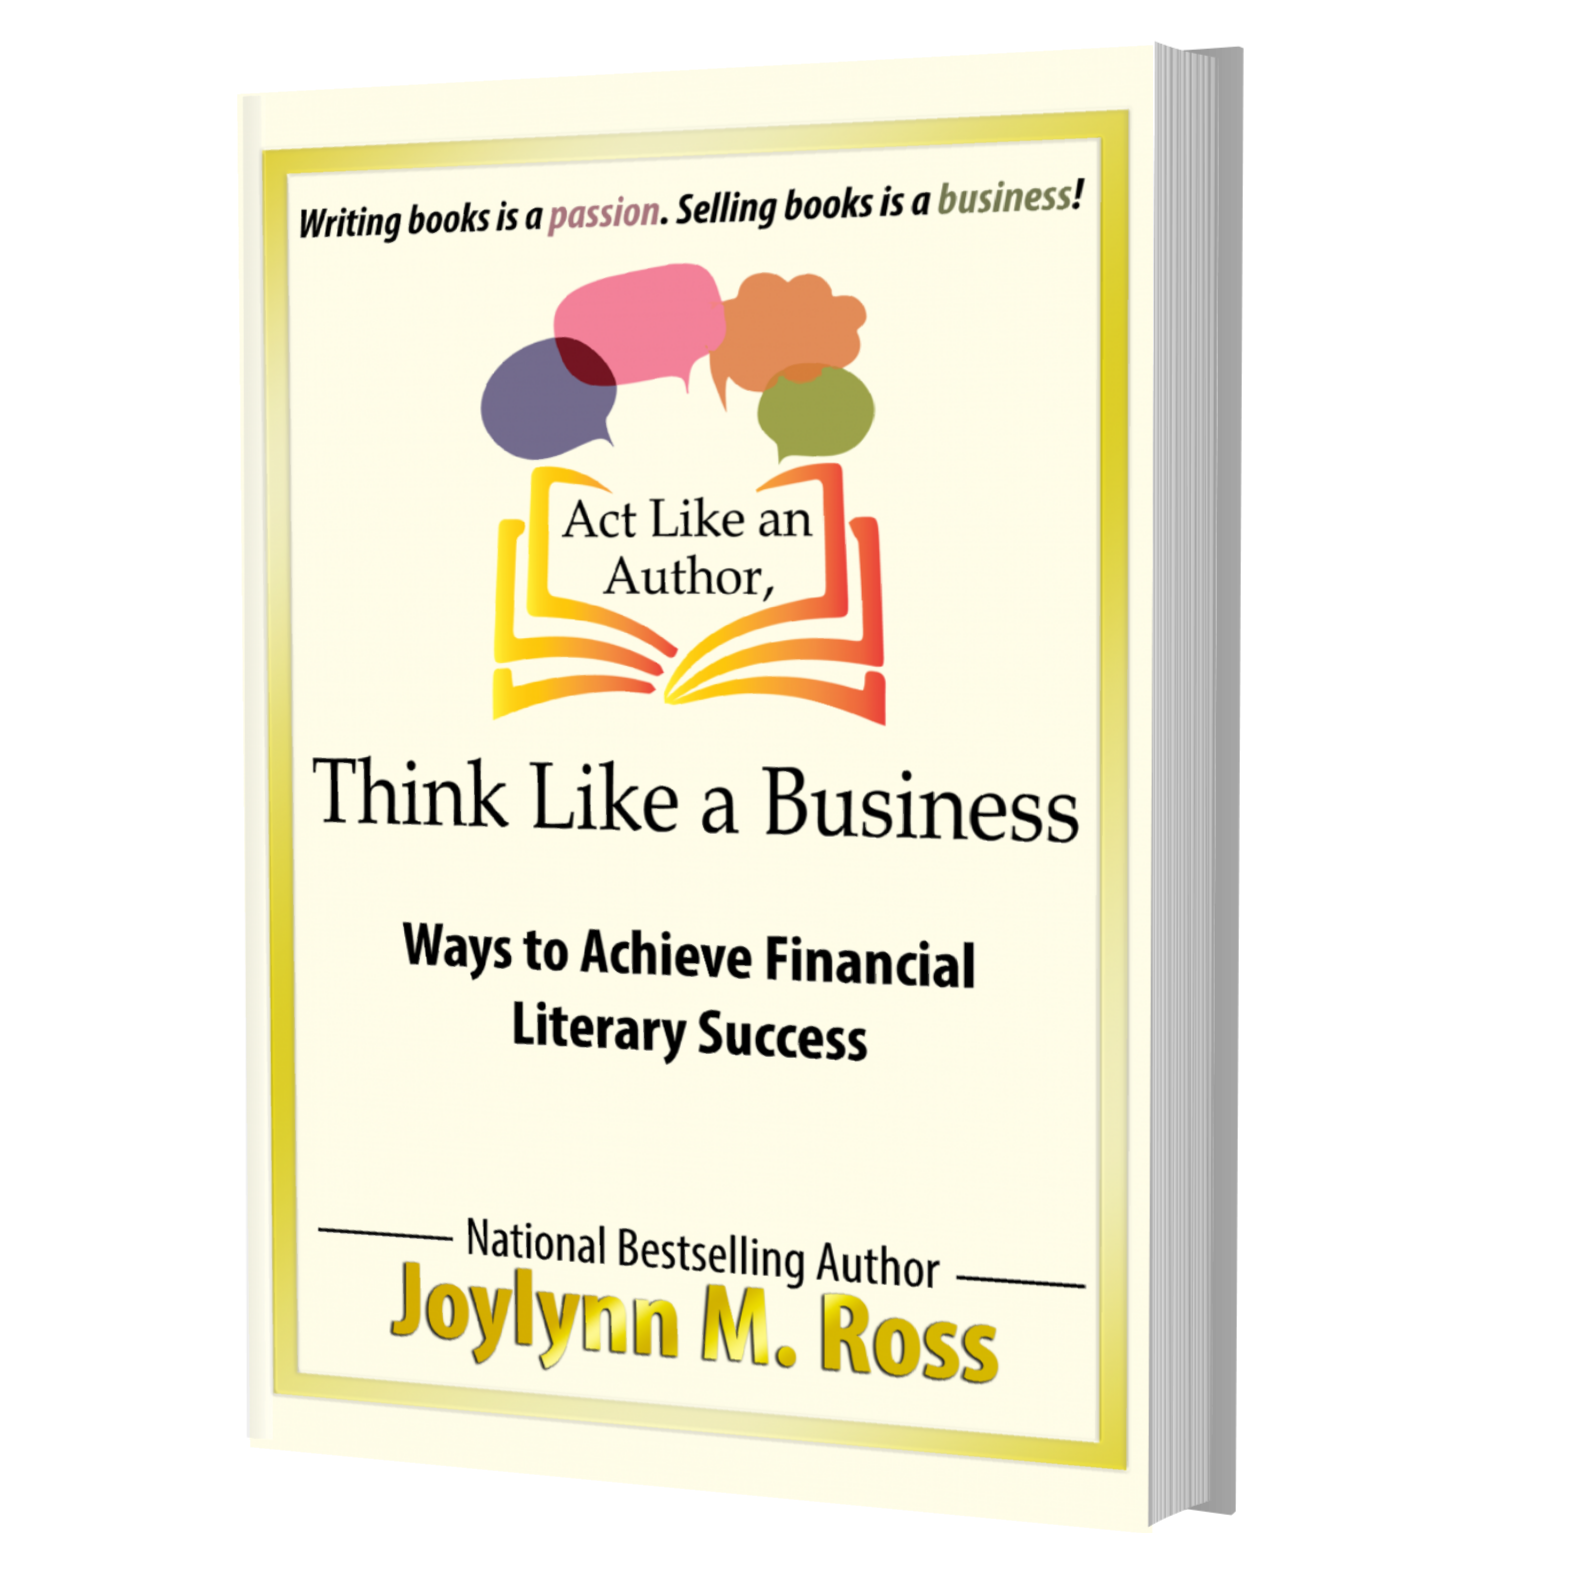 Act Like an Author. Think Like a Business | Joylynn M. Ross | Online Literary Educator | The Literary "Know-it-all"